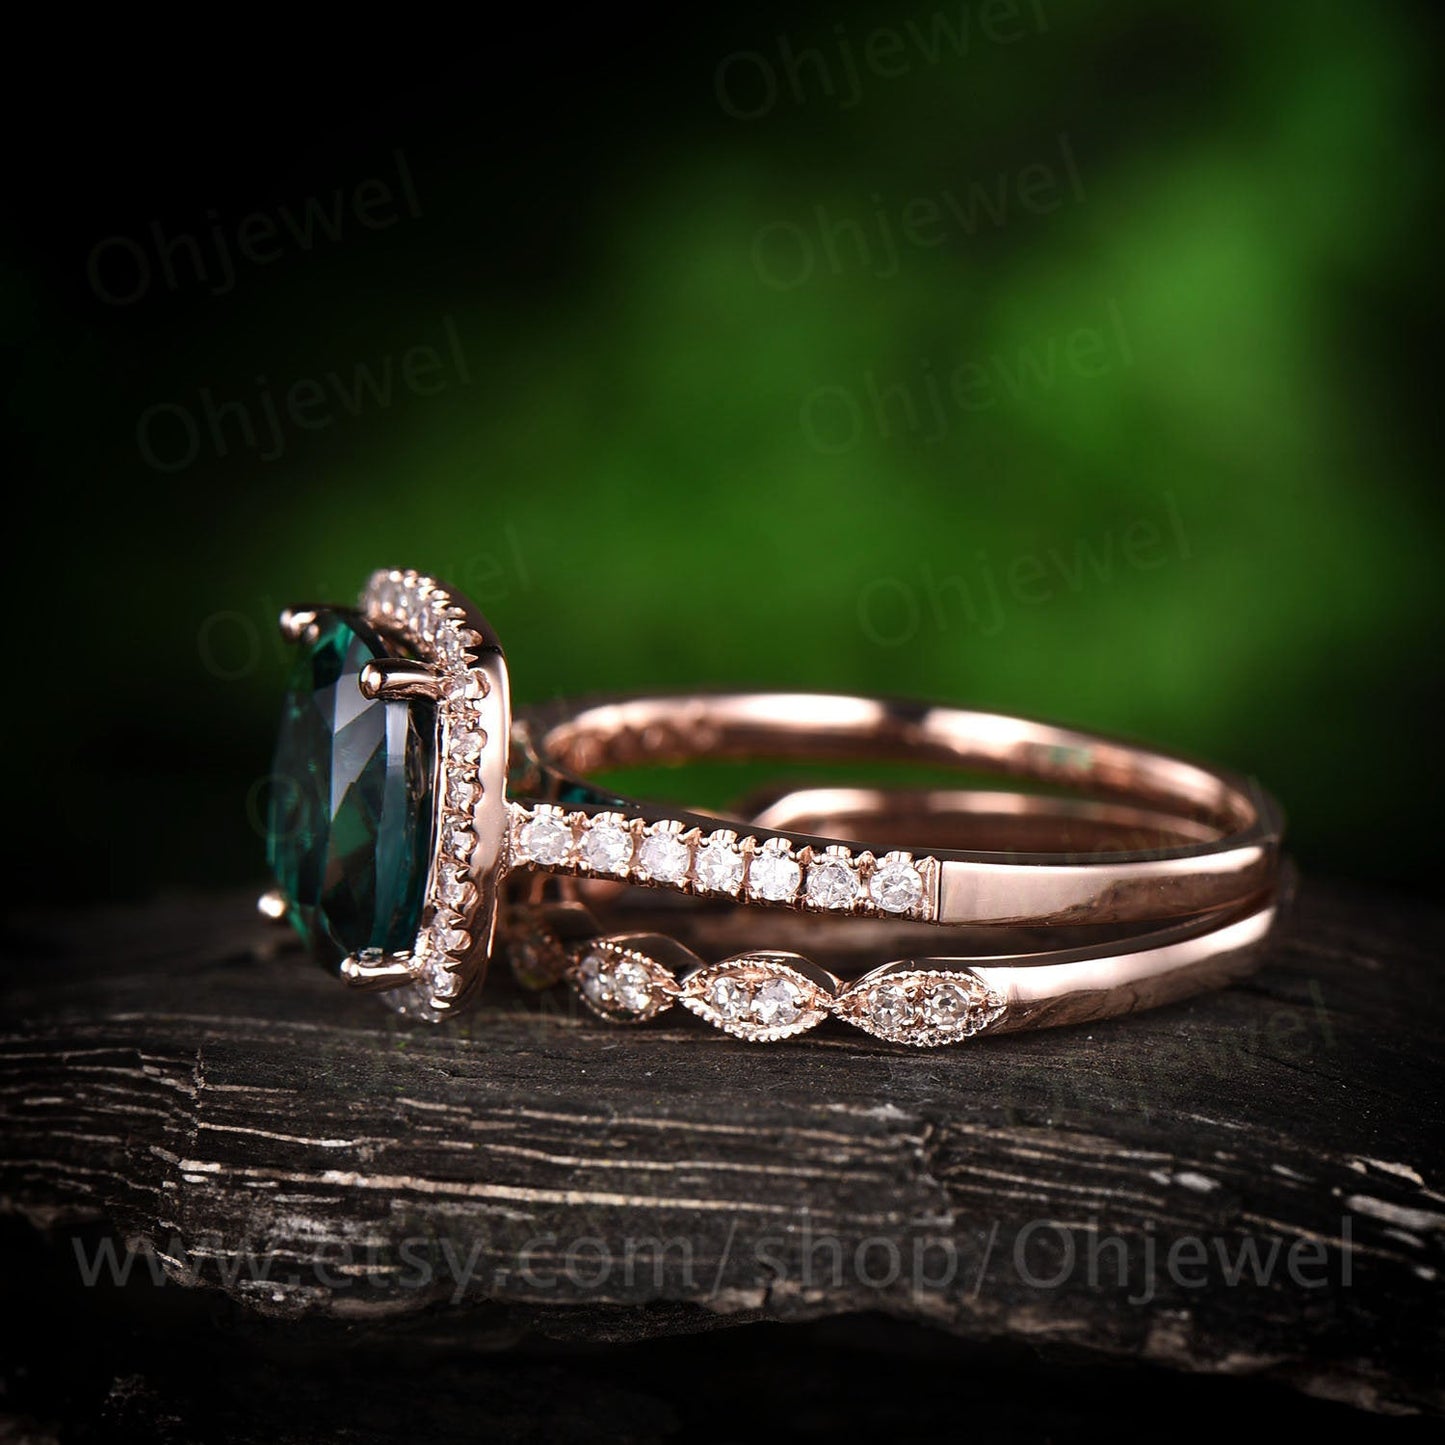 1PC only emerald engagement ring rose gold emerald ring vintage diamond halo May birthstone wedding bridal ring